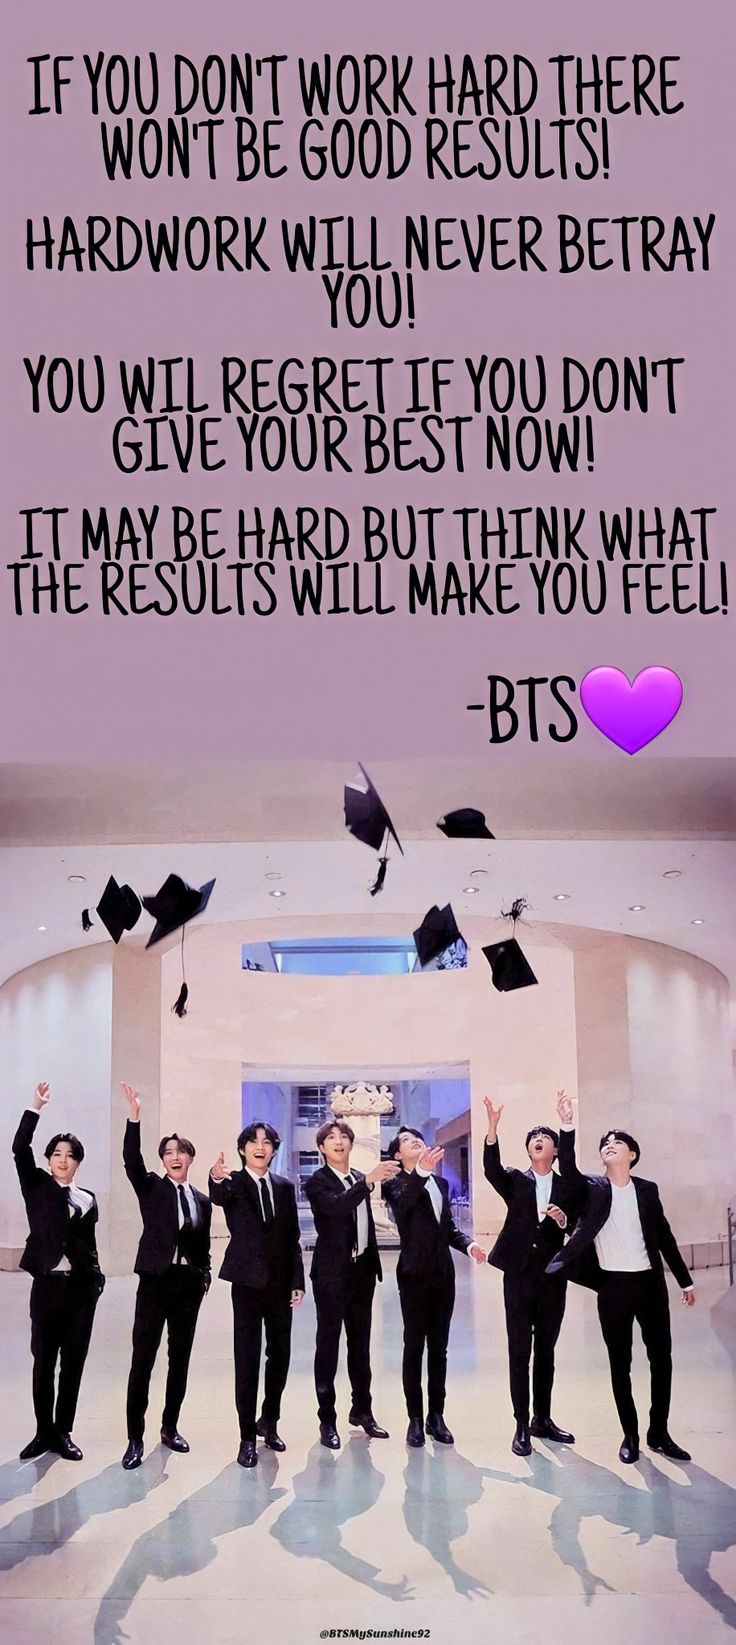 10 Inspiring BTS Quotes That Will Brighten Your Day